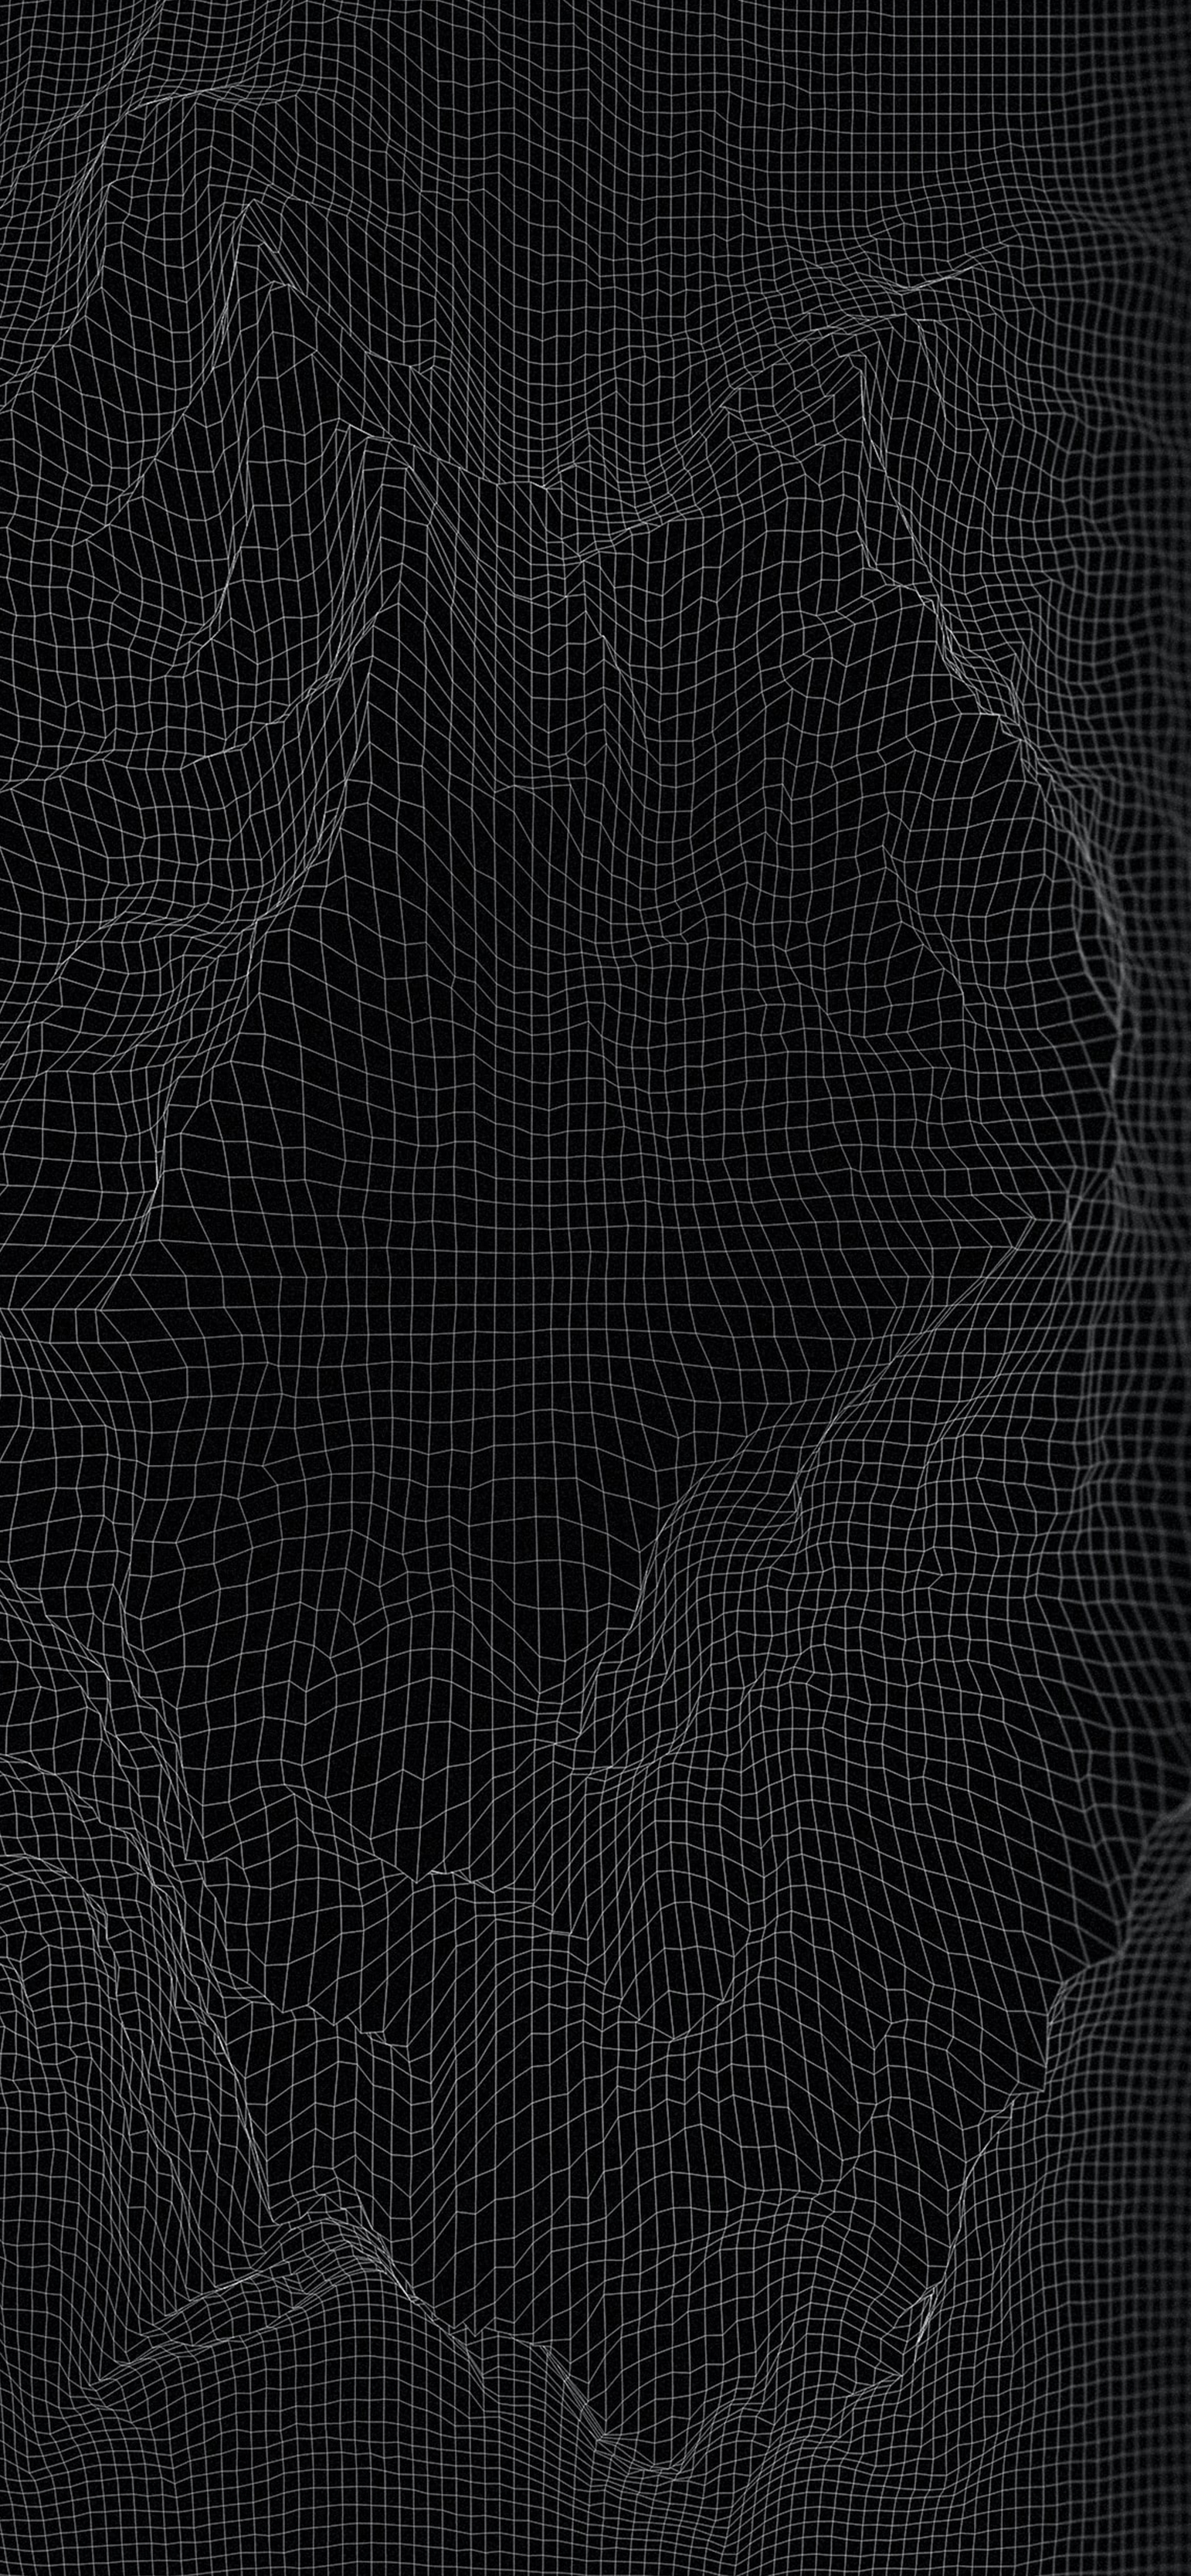 General 1542x3334 topography abstract monochrome wireframe digital art portrait display